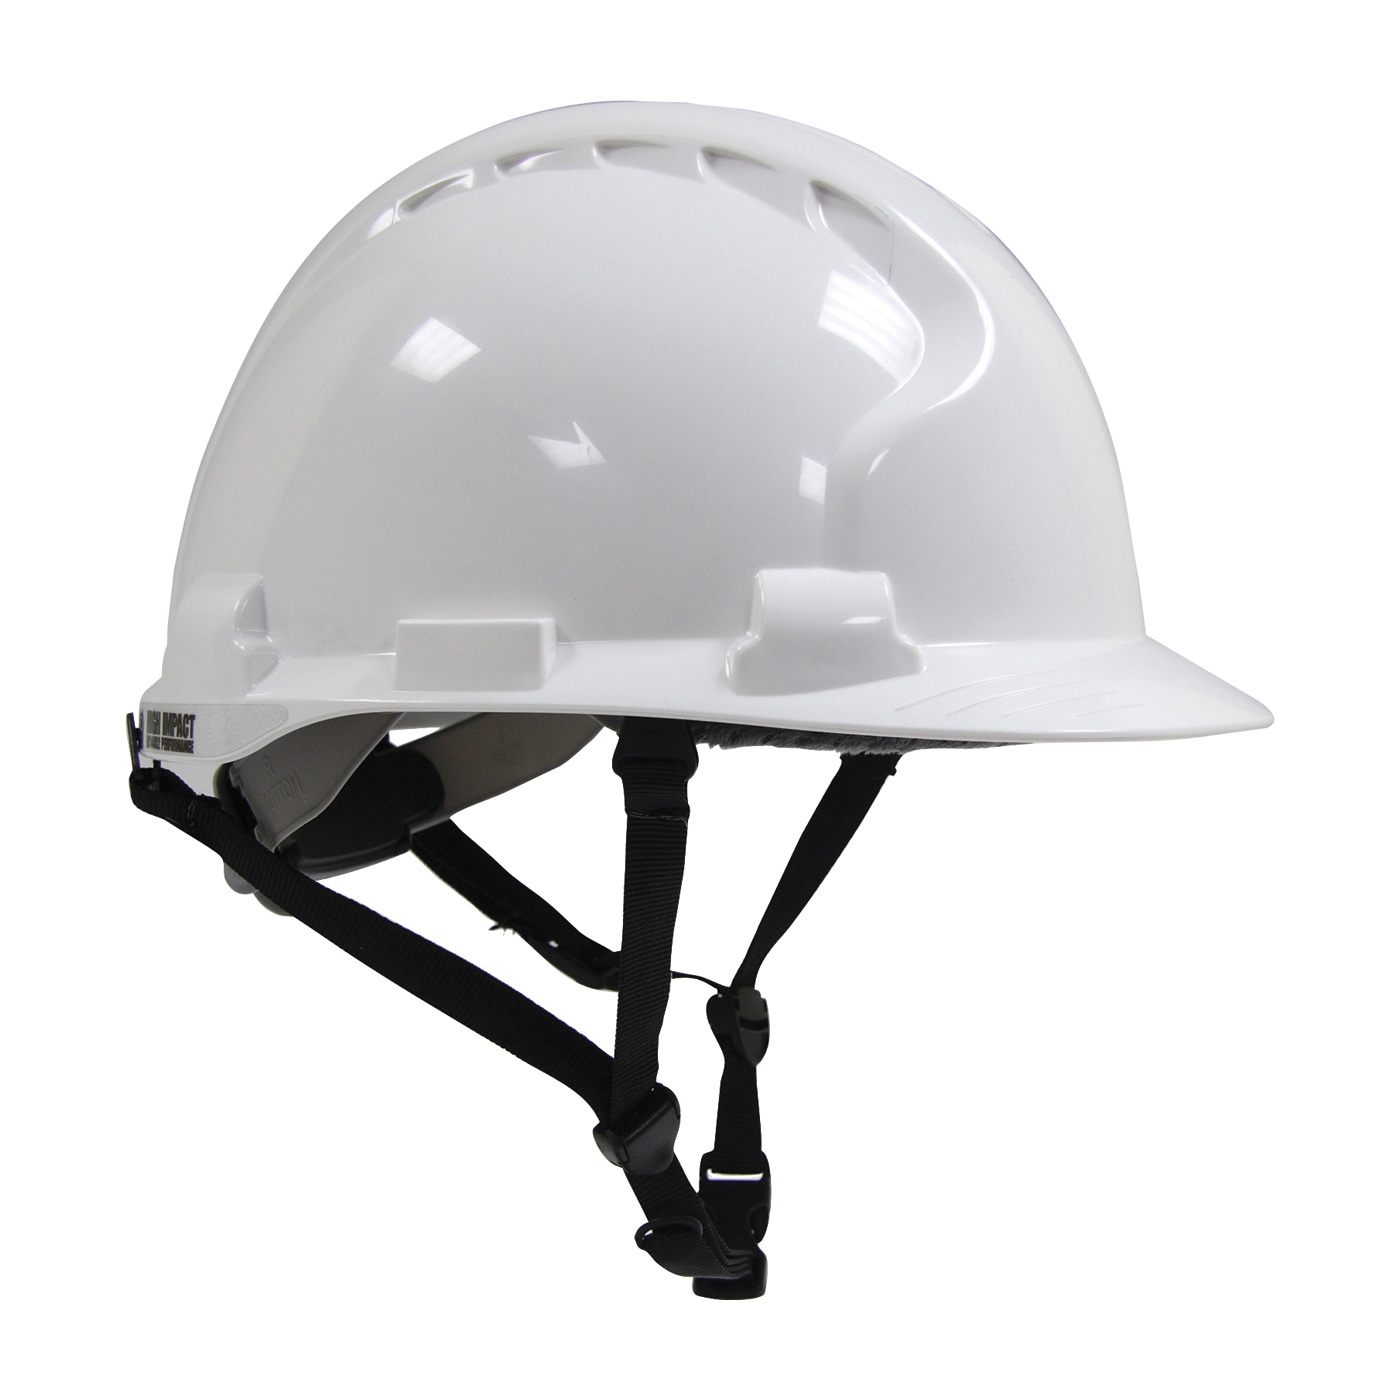 PIP® MK8 Evolution® 280-AHS240-10 Cap Style Non-Vented Standard Brim Hard Hat, SZ 6-5/8 Fits Mini Hat, SZ 8 Fits Max Hat, HDPE Shell/EPS Impact Liner, Deluxe Polyester Suspension, ANSI Electrical Class Rating: Class E, Wheel Ratchet Adjustment